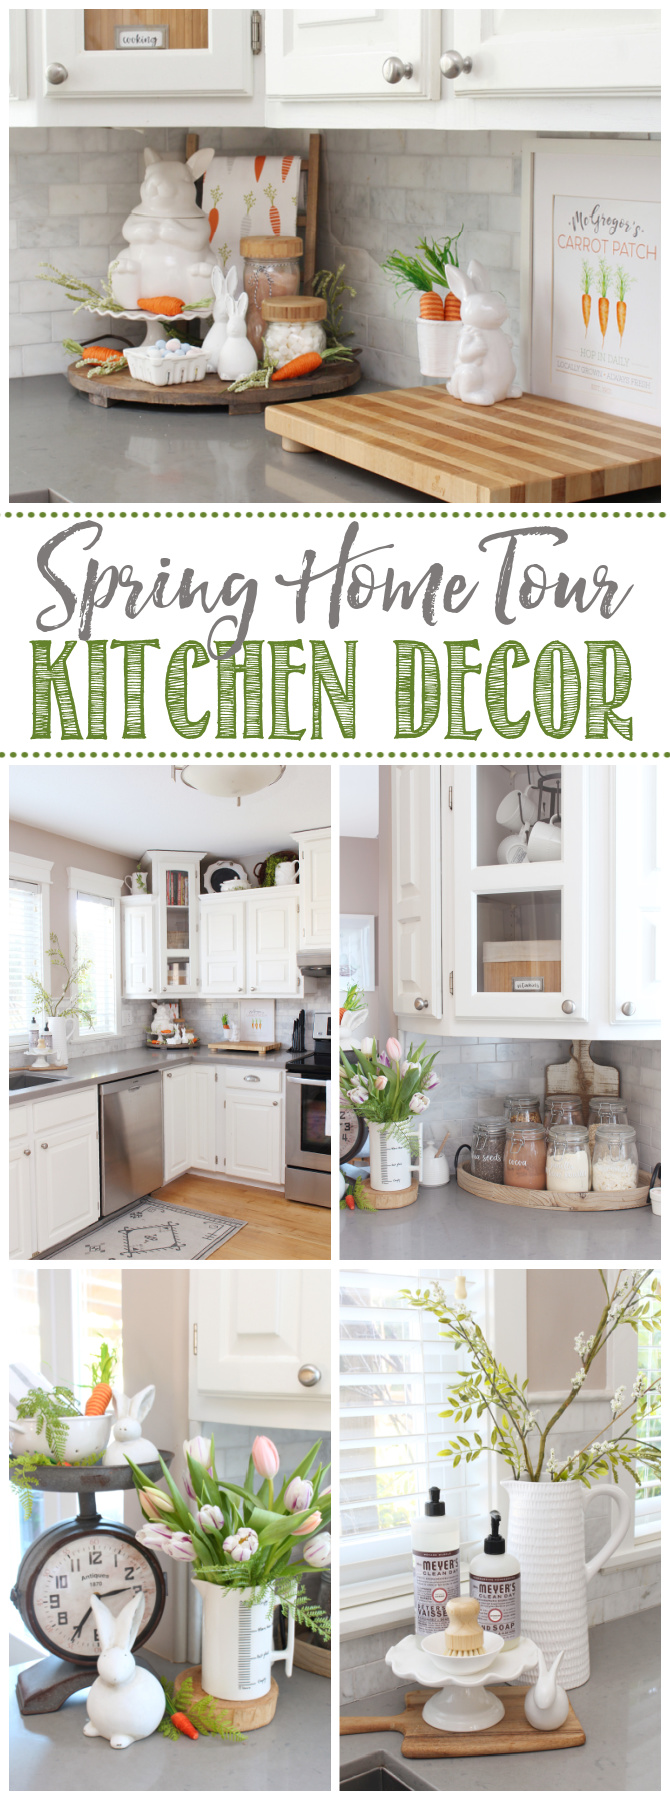 Collage of beautiful simple spring kitchen decor ideas.